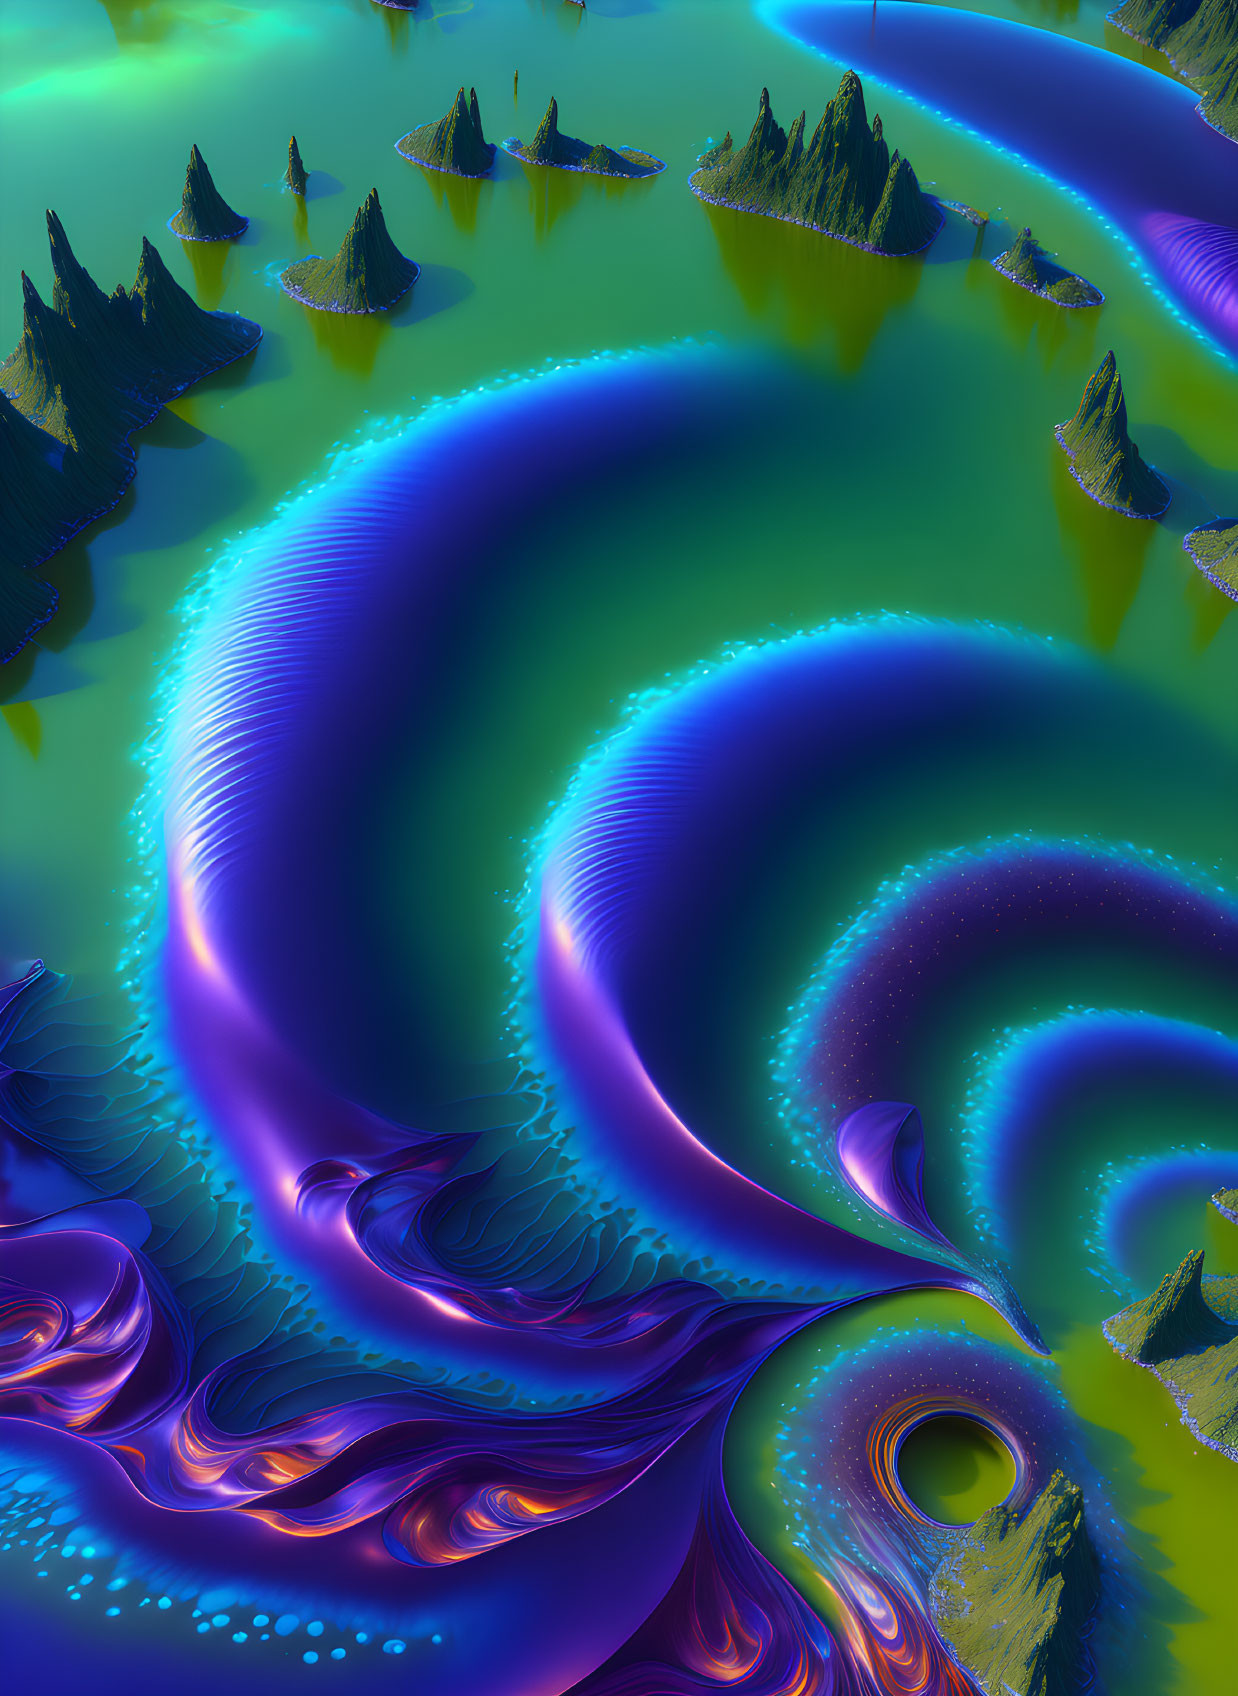 Swirling Blue and Green Patterns in Digital Art Piece